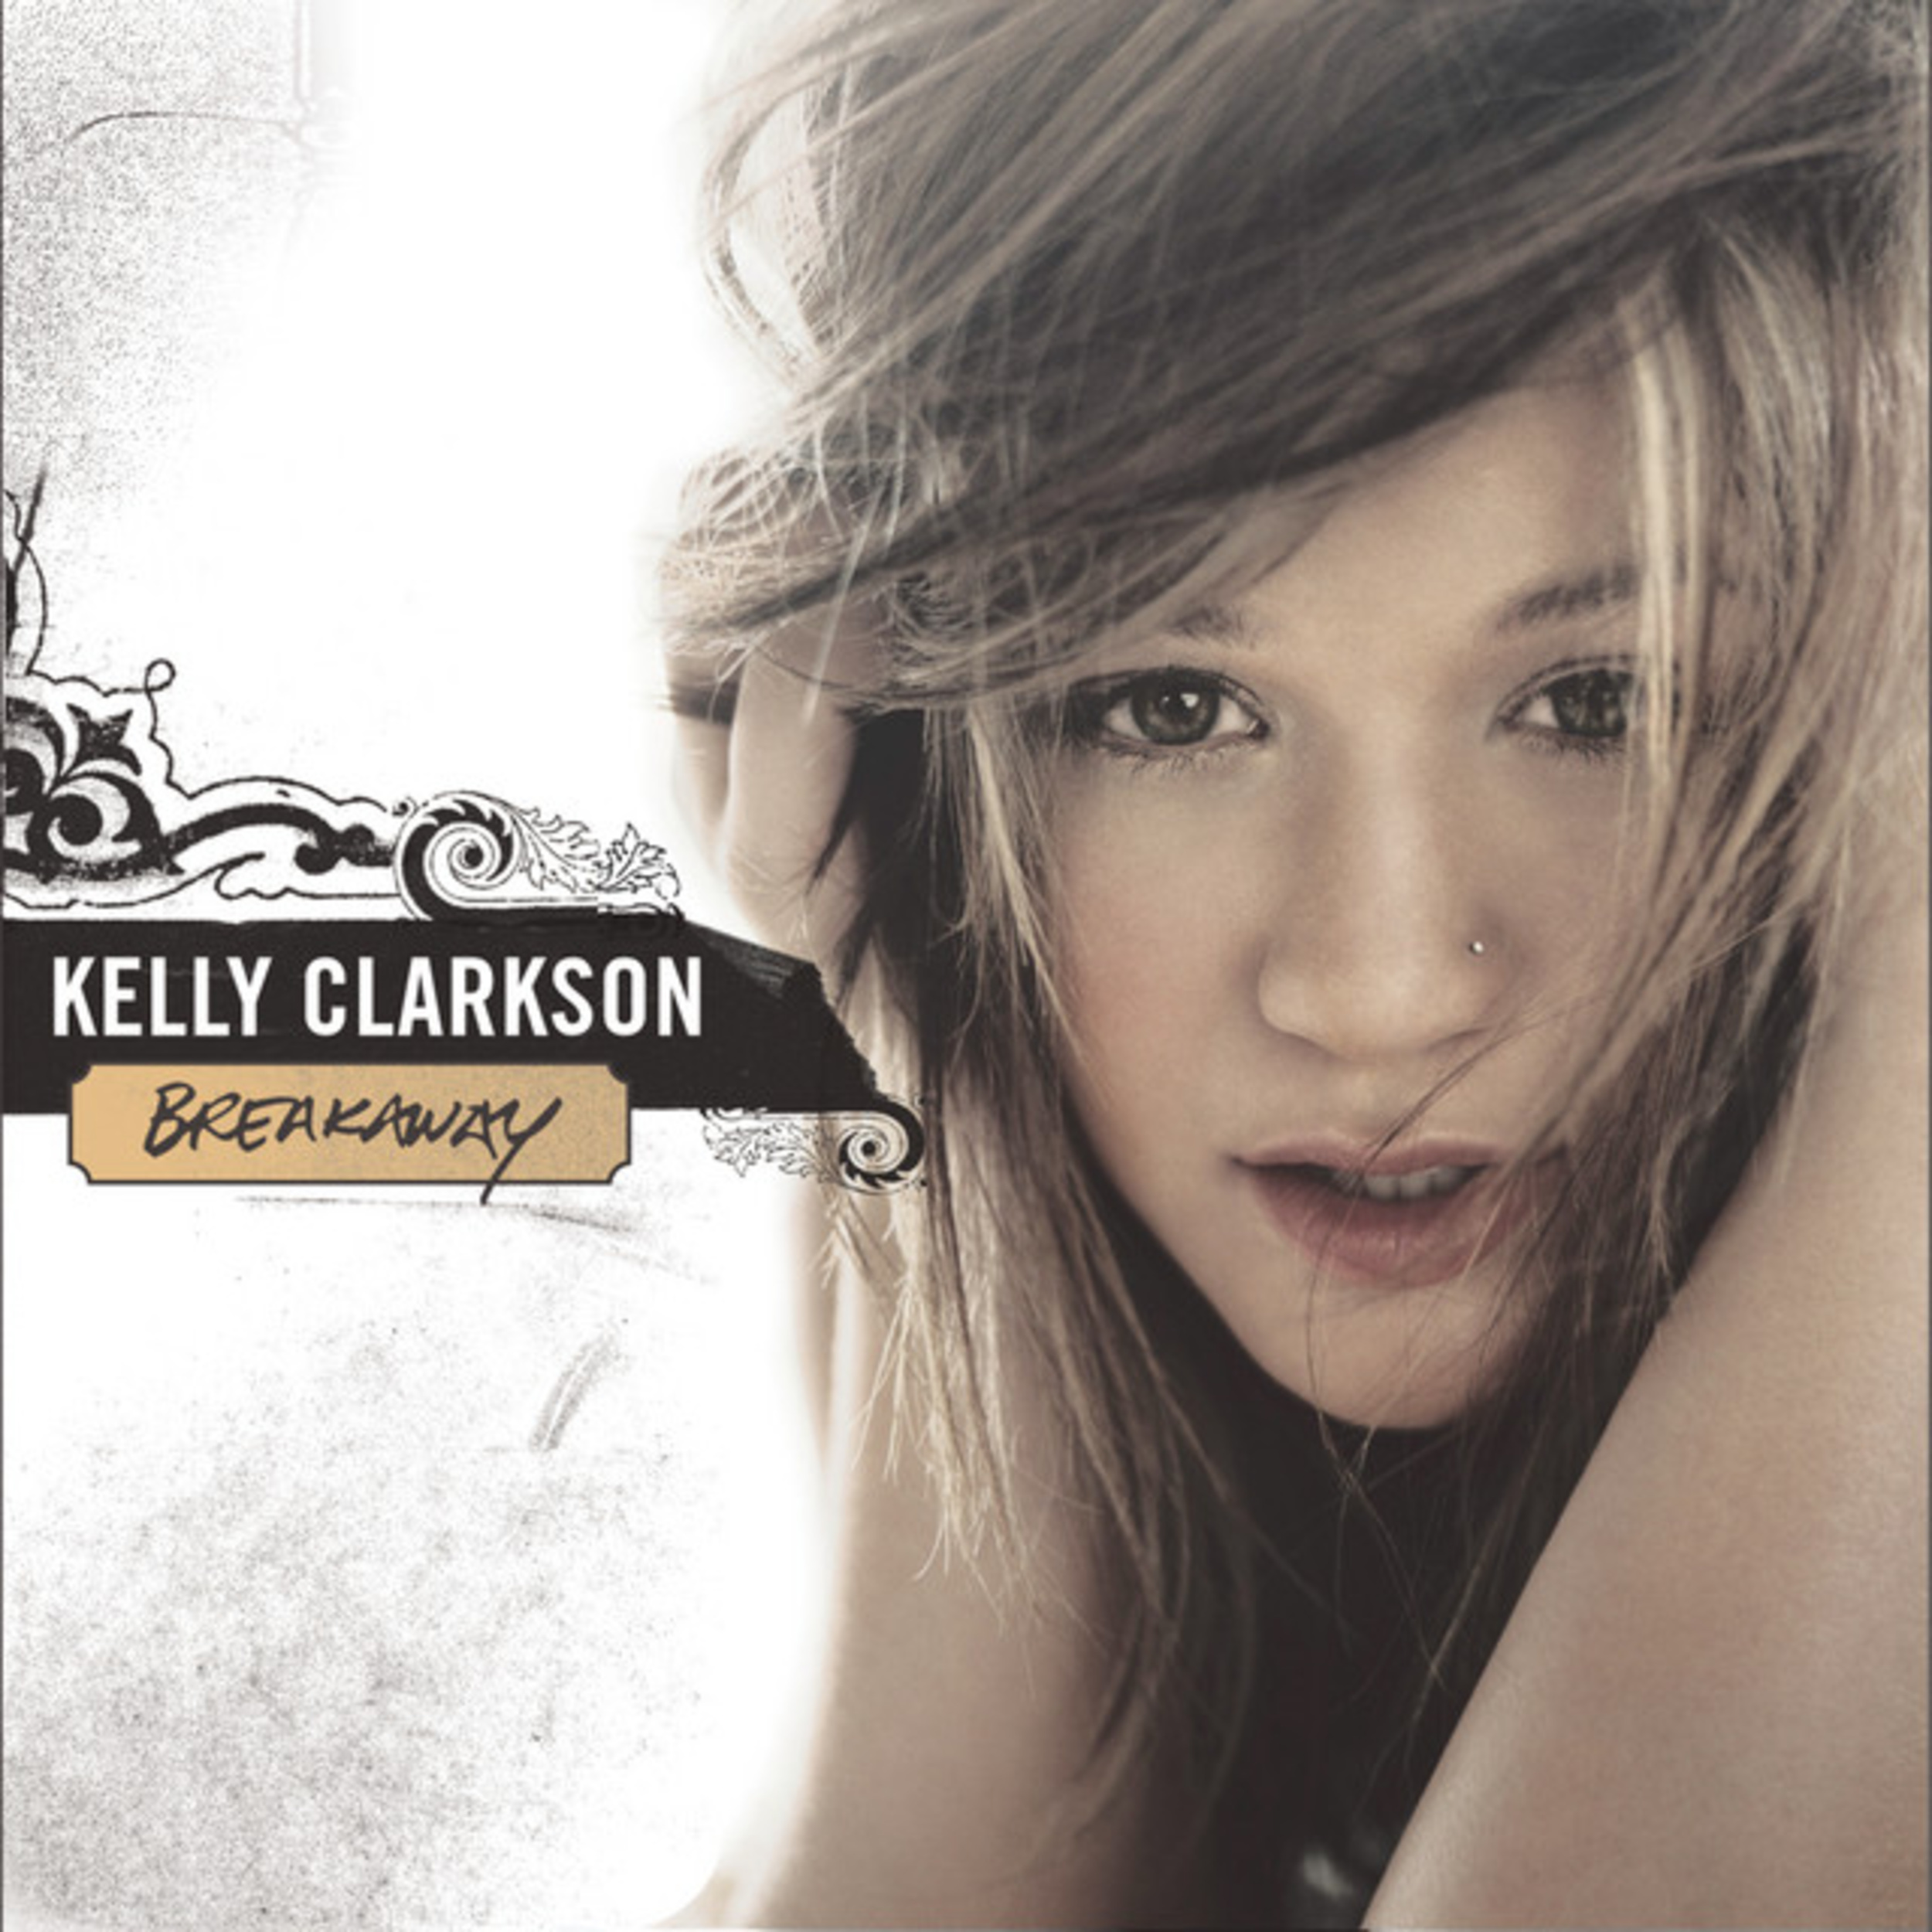 <p>After winning the first season of <em>American Idol,</em> Kelly Clarkson was ready to prove that she could follow up her debut album. A year later, she released her sophomore album, <em>Breakaway</em>, to rave reviews. Continuing with a sound blending pop and rock elements, Clarkson's album soared across the charts with hit singles like "Because of You" and <a href="https://www.youtube.com/watch?v=R7UrFYvl5TE">"Since U Been Gone." </a></p><p><a href='https://www.msn.com/en-us/community/channel/vid-cj9pqbr0vn9in2b6ddcd8sfgpfq6x6utp44fssrv6mc2gtybw0us'>Follow us on MSN to see more of our exclusive entertainment content.</a></p>